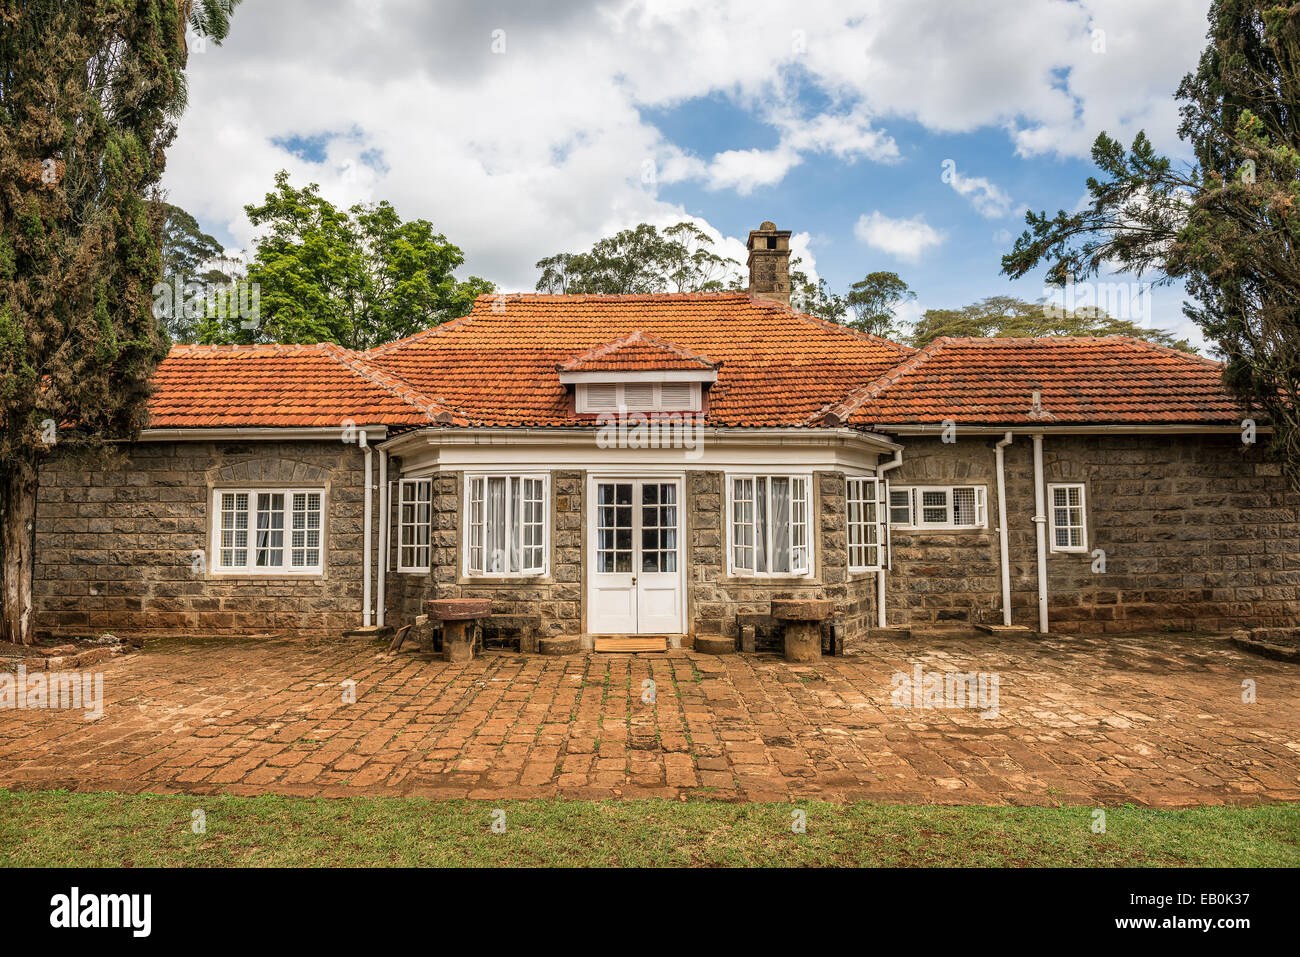 Museum of Karen Blixen. Blixen was a Danish author best known for Out of Africa, her account of living in Kenya. Stock Photo